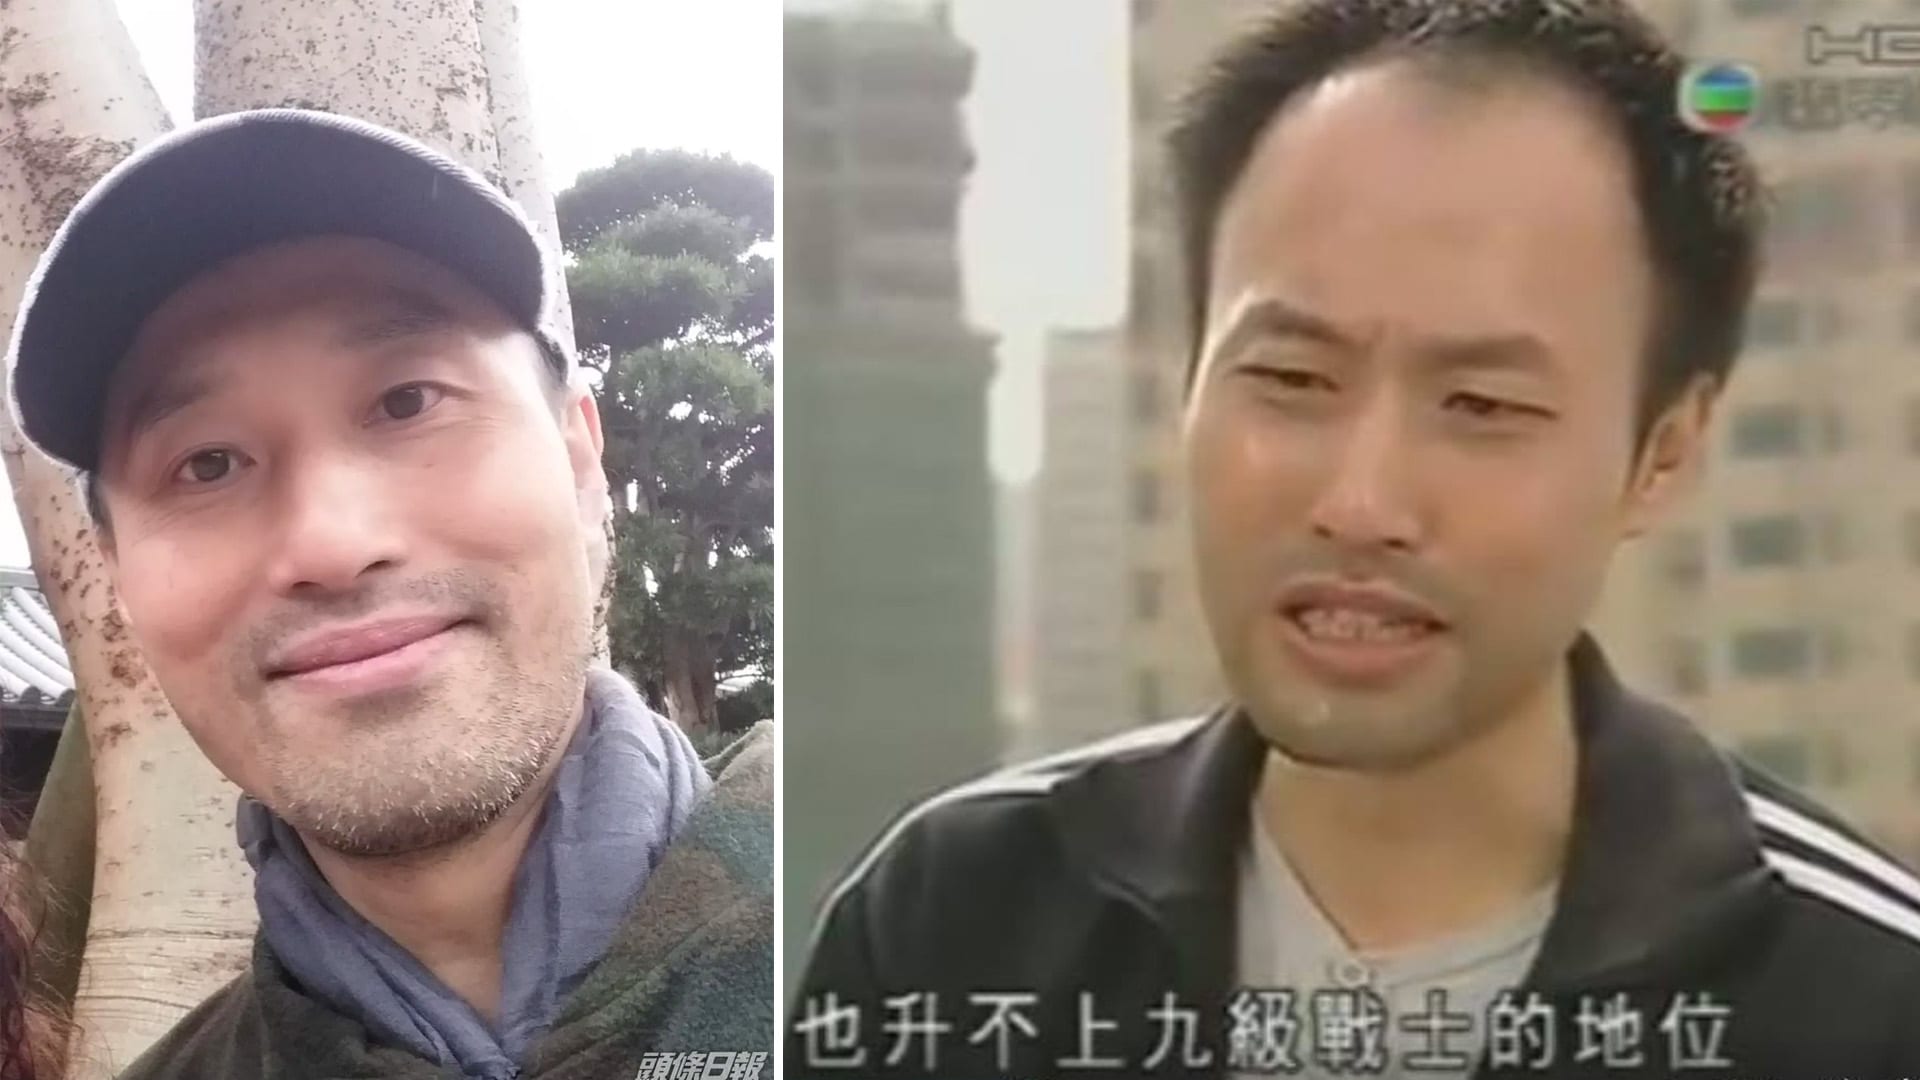 HK Actor Wong Wai Leung, Best Known For Playing ‘Crazy Guys’ In TVB Dramas, Said To Be Struggling With Mental Health Issues Since Leaving Showbiz 12 Years Ago